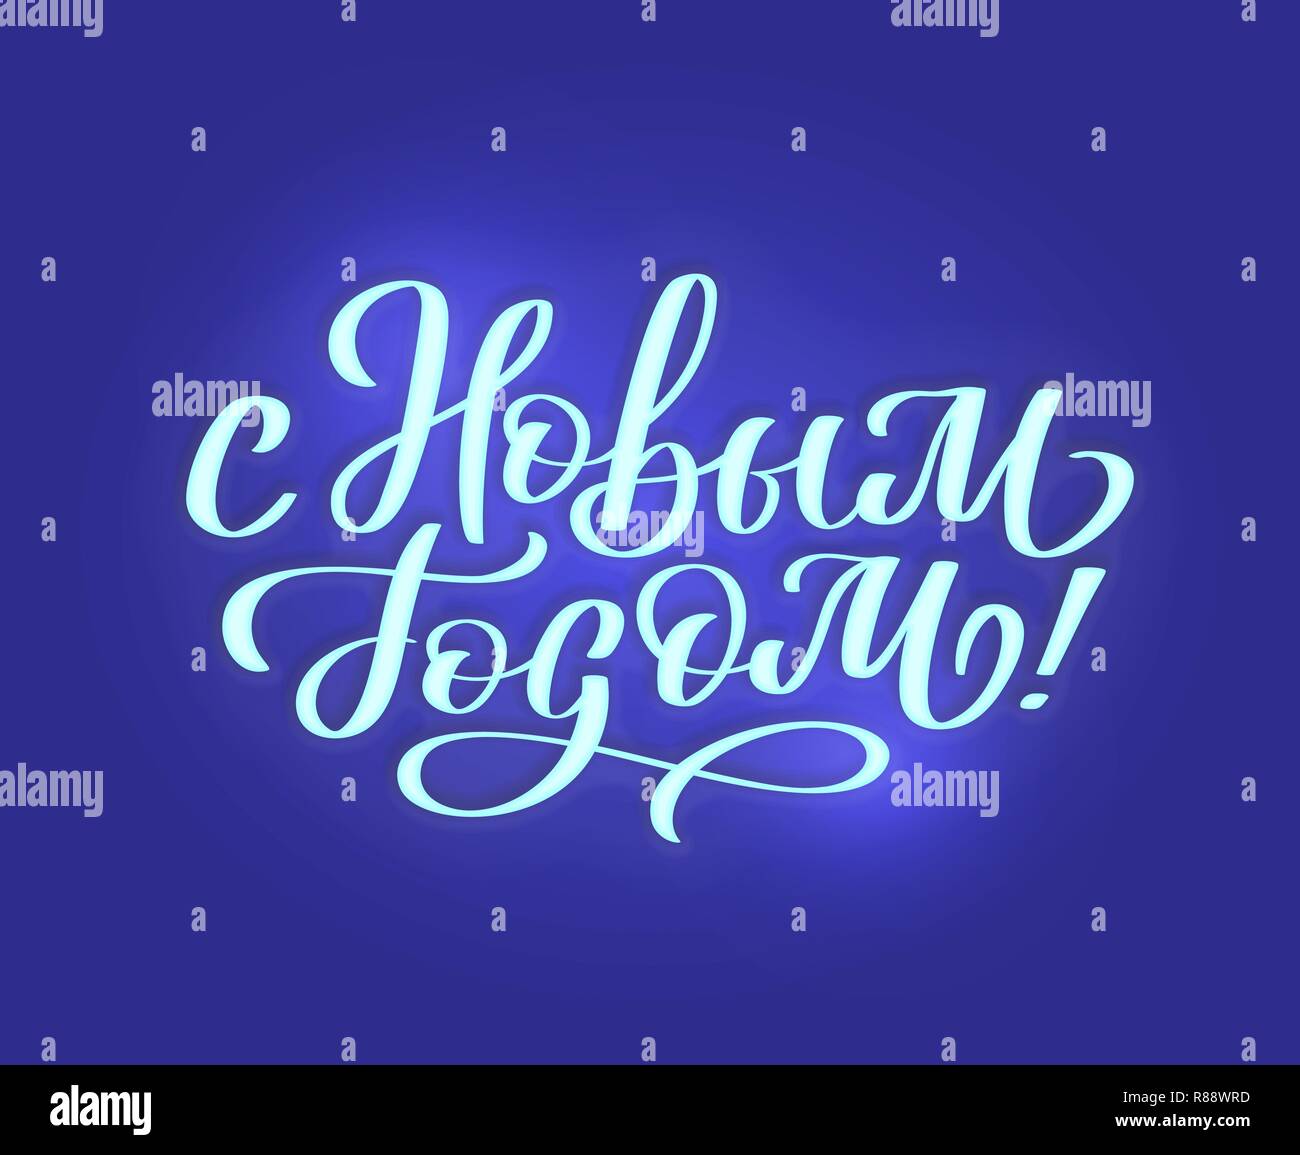 With new year - from Russian, neon text sign. Vector background. Neon glowing signboard, bright luminous banner with lettering in hand-written style. For foto overlay, decoration. Stock Vector